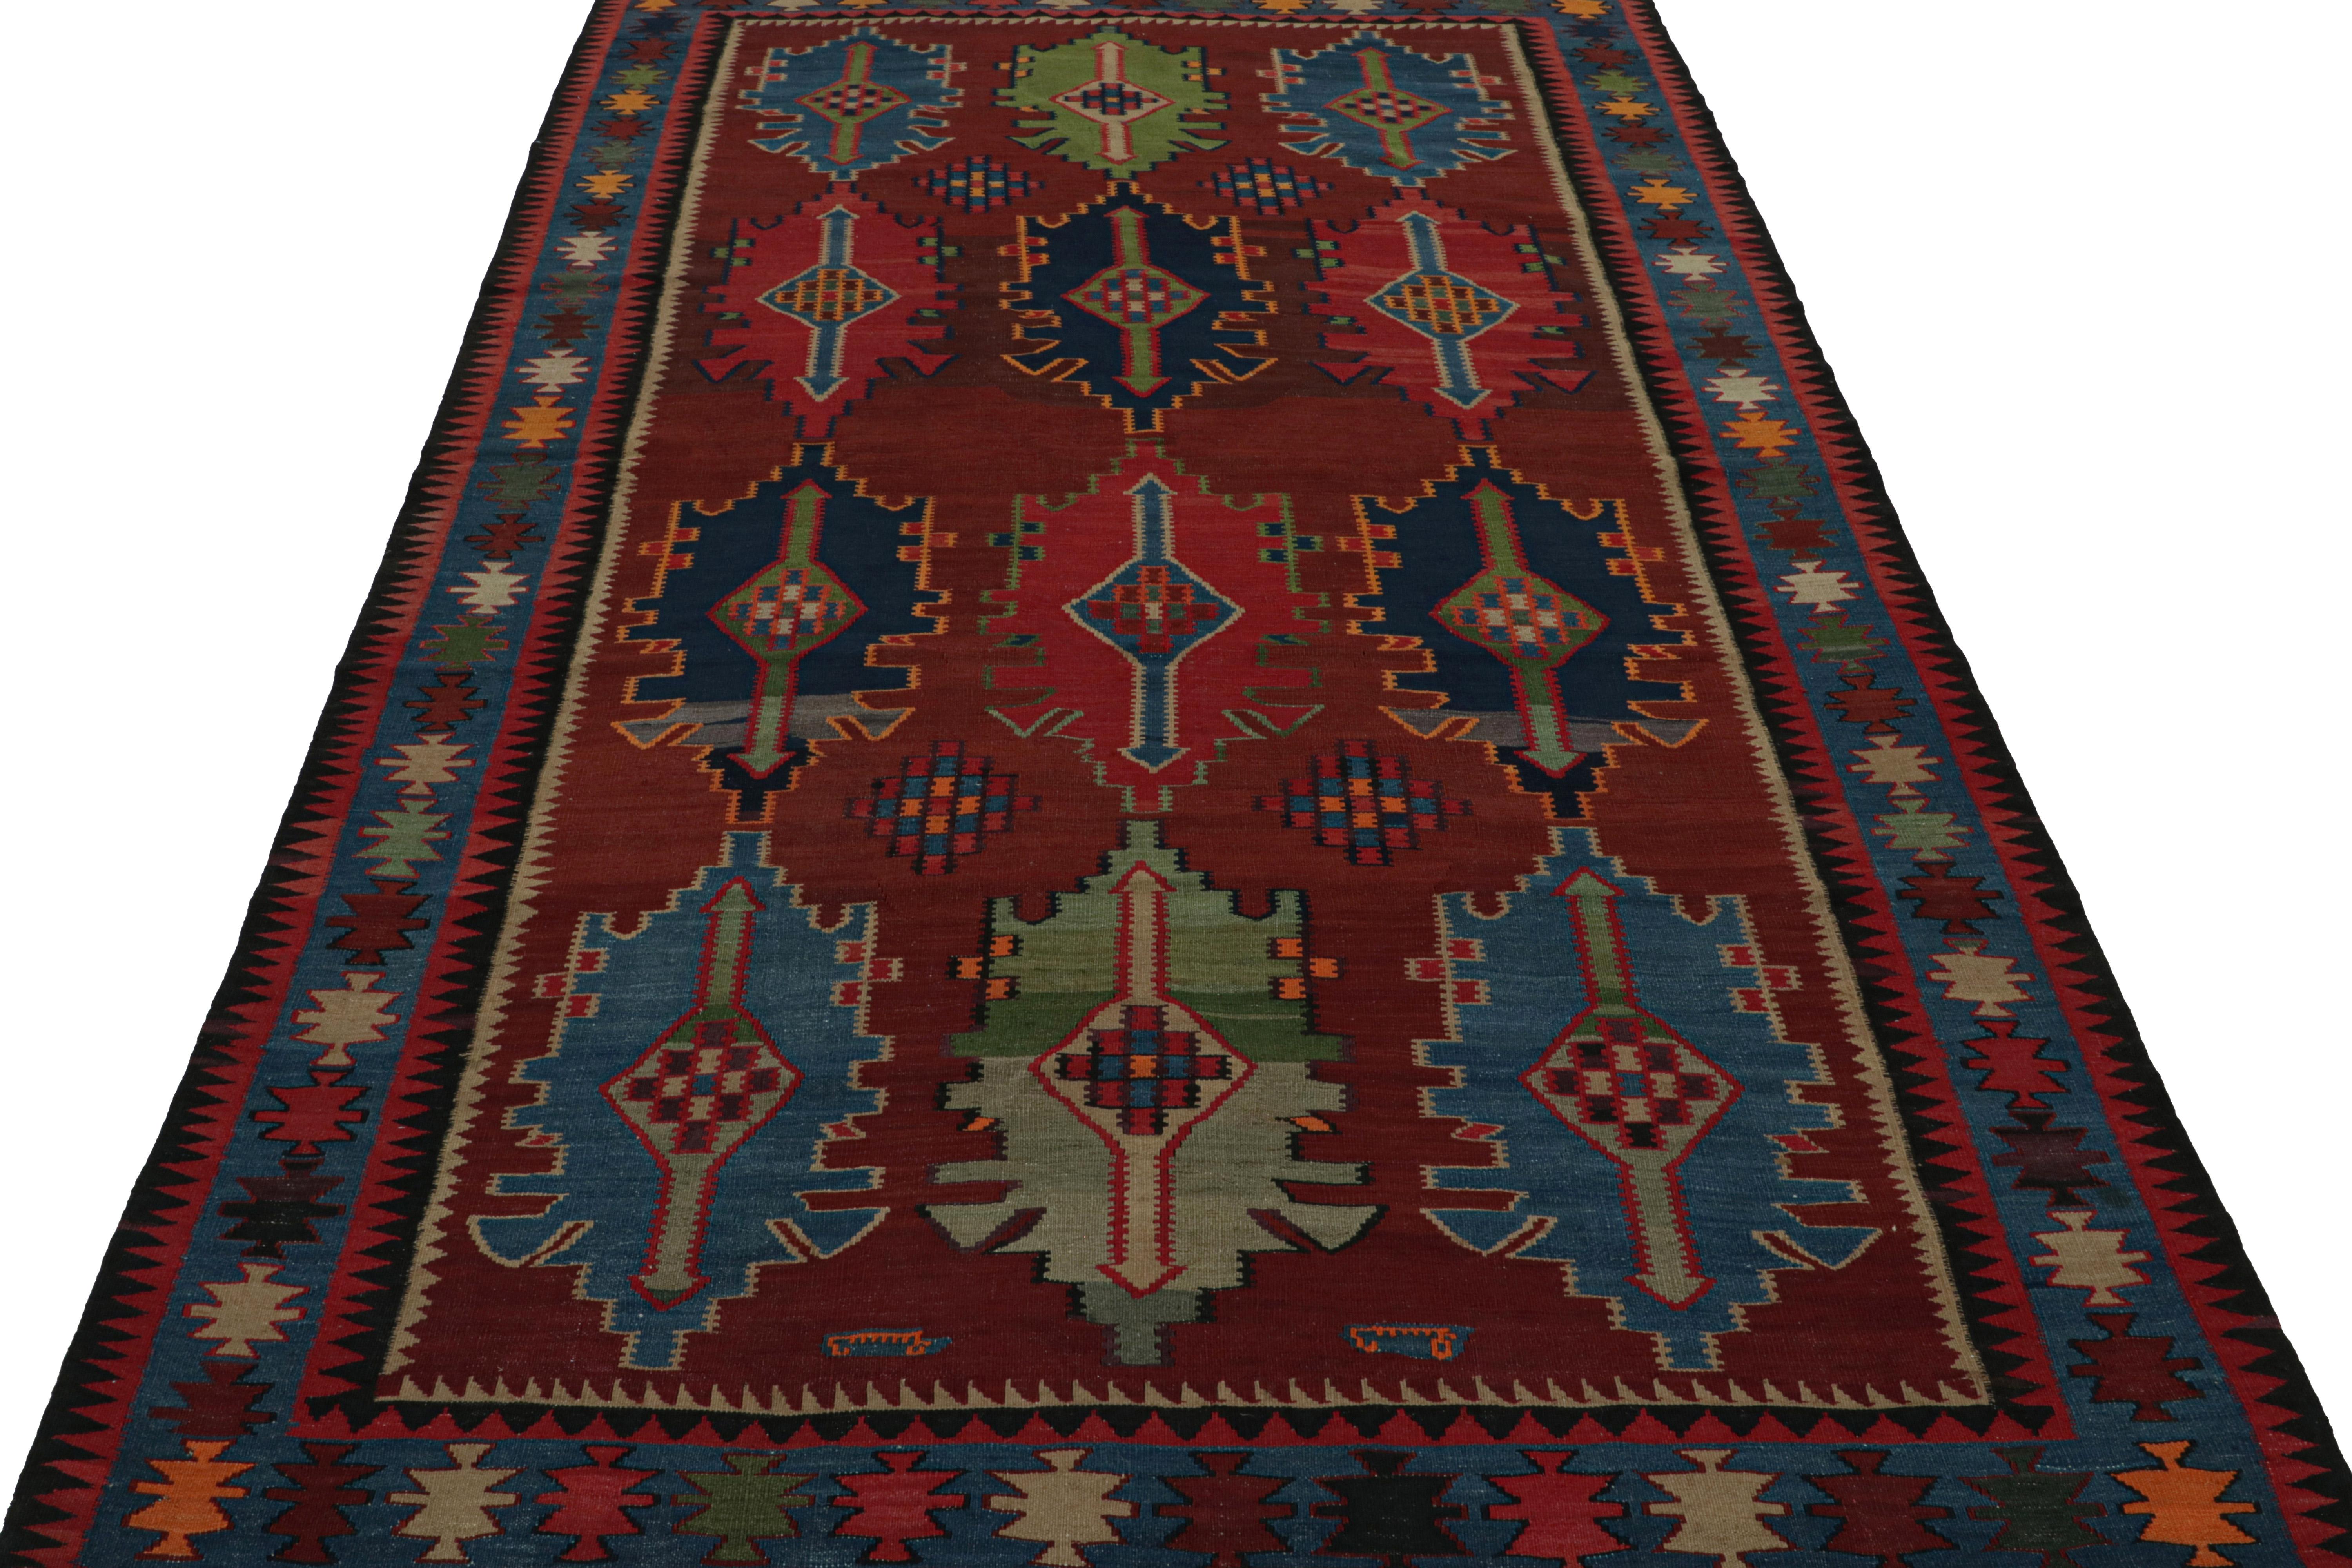 Hand-Woven  Vintage Afghan Tribal Kilim rug, with Geometric Patterns, from Rug & Kilim For Sale